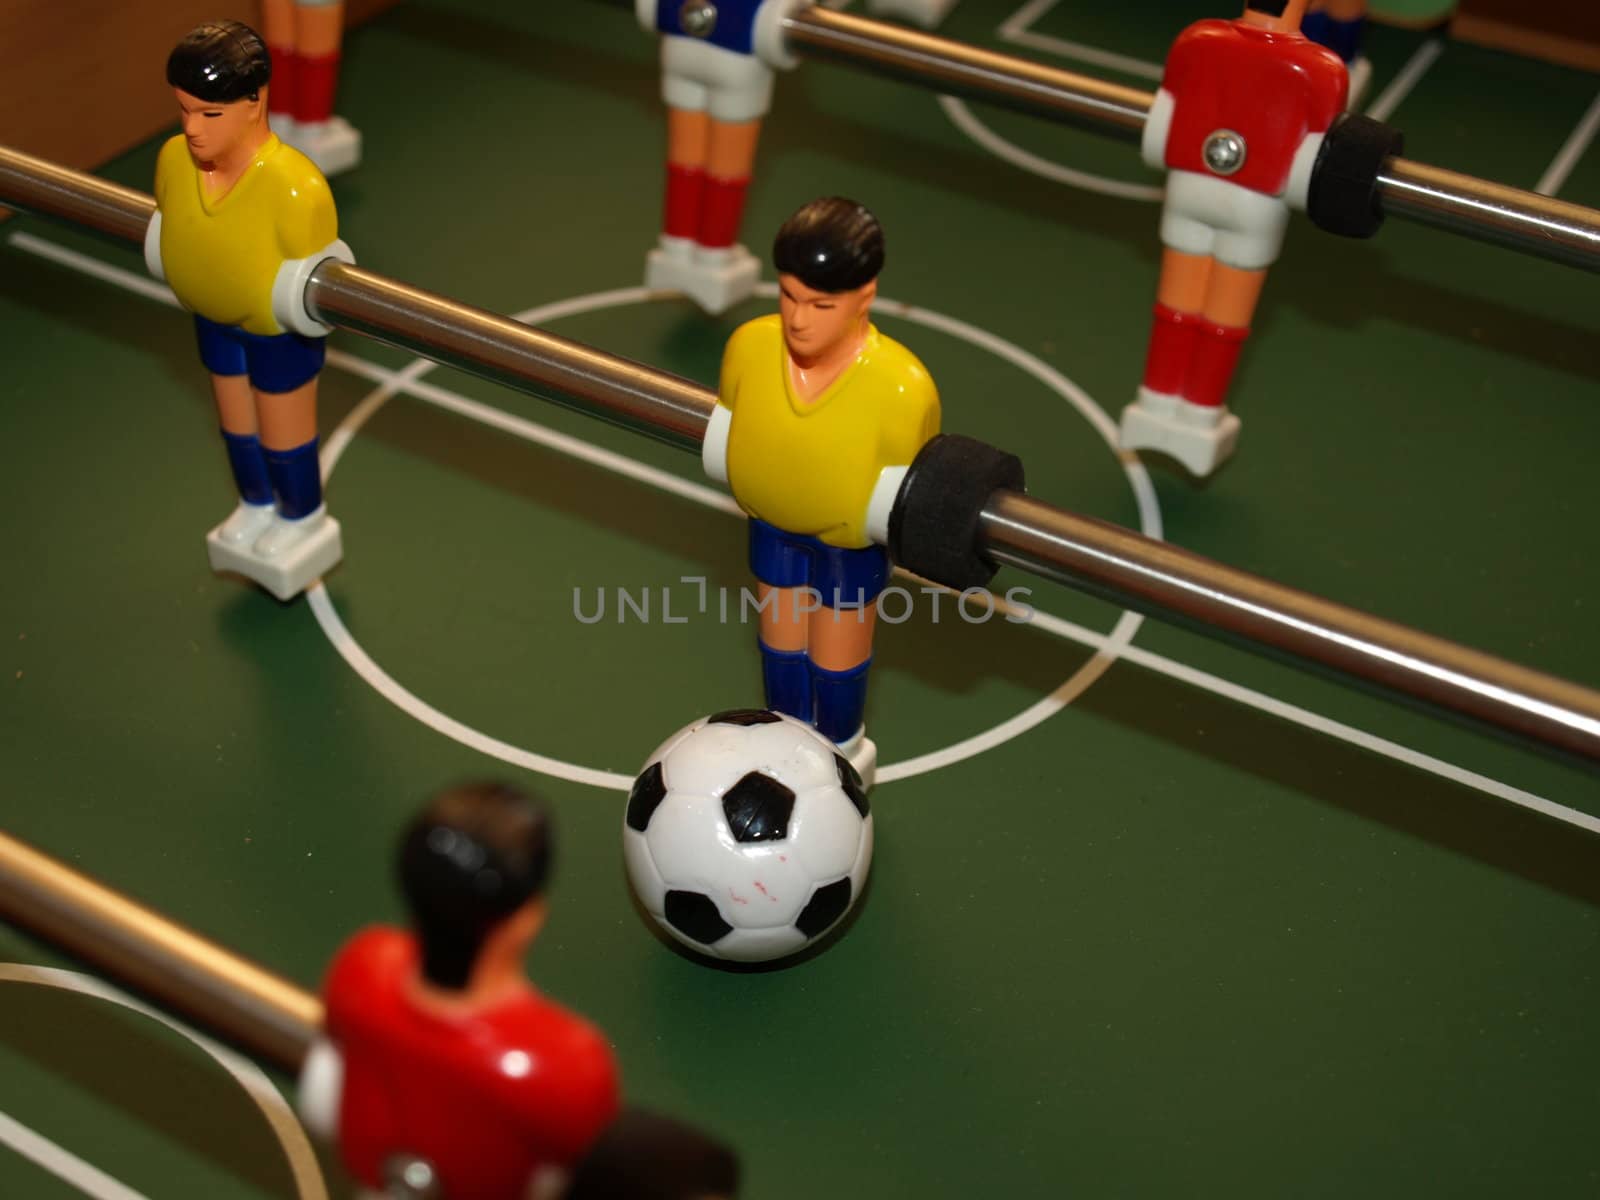 Table top soccer by northwoodsphoto